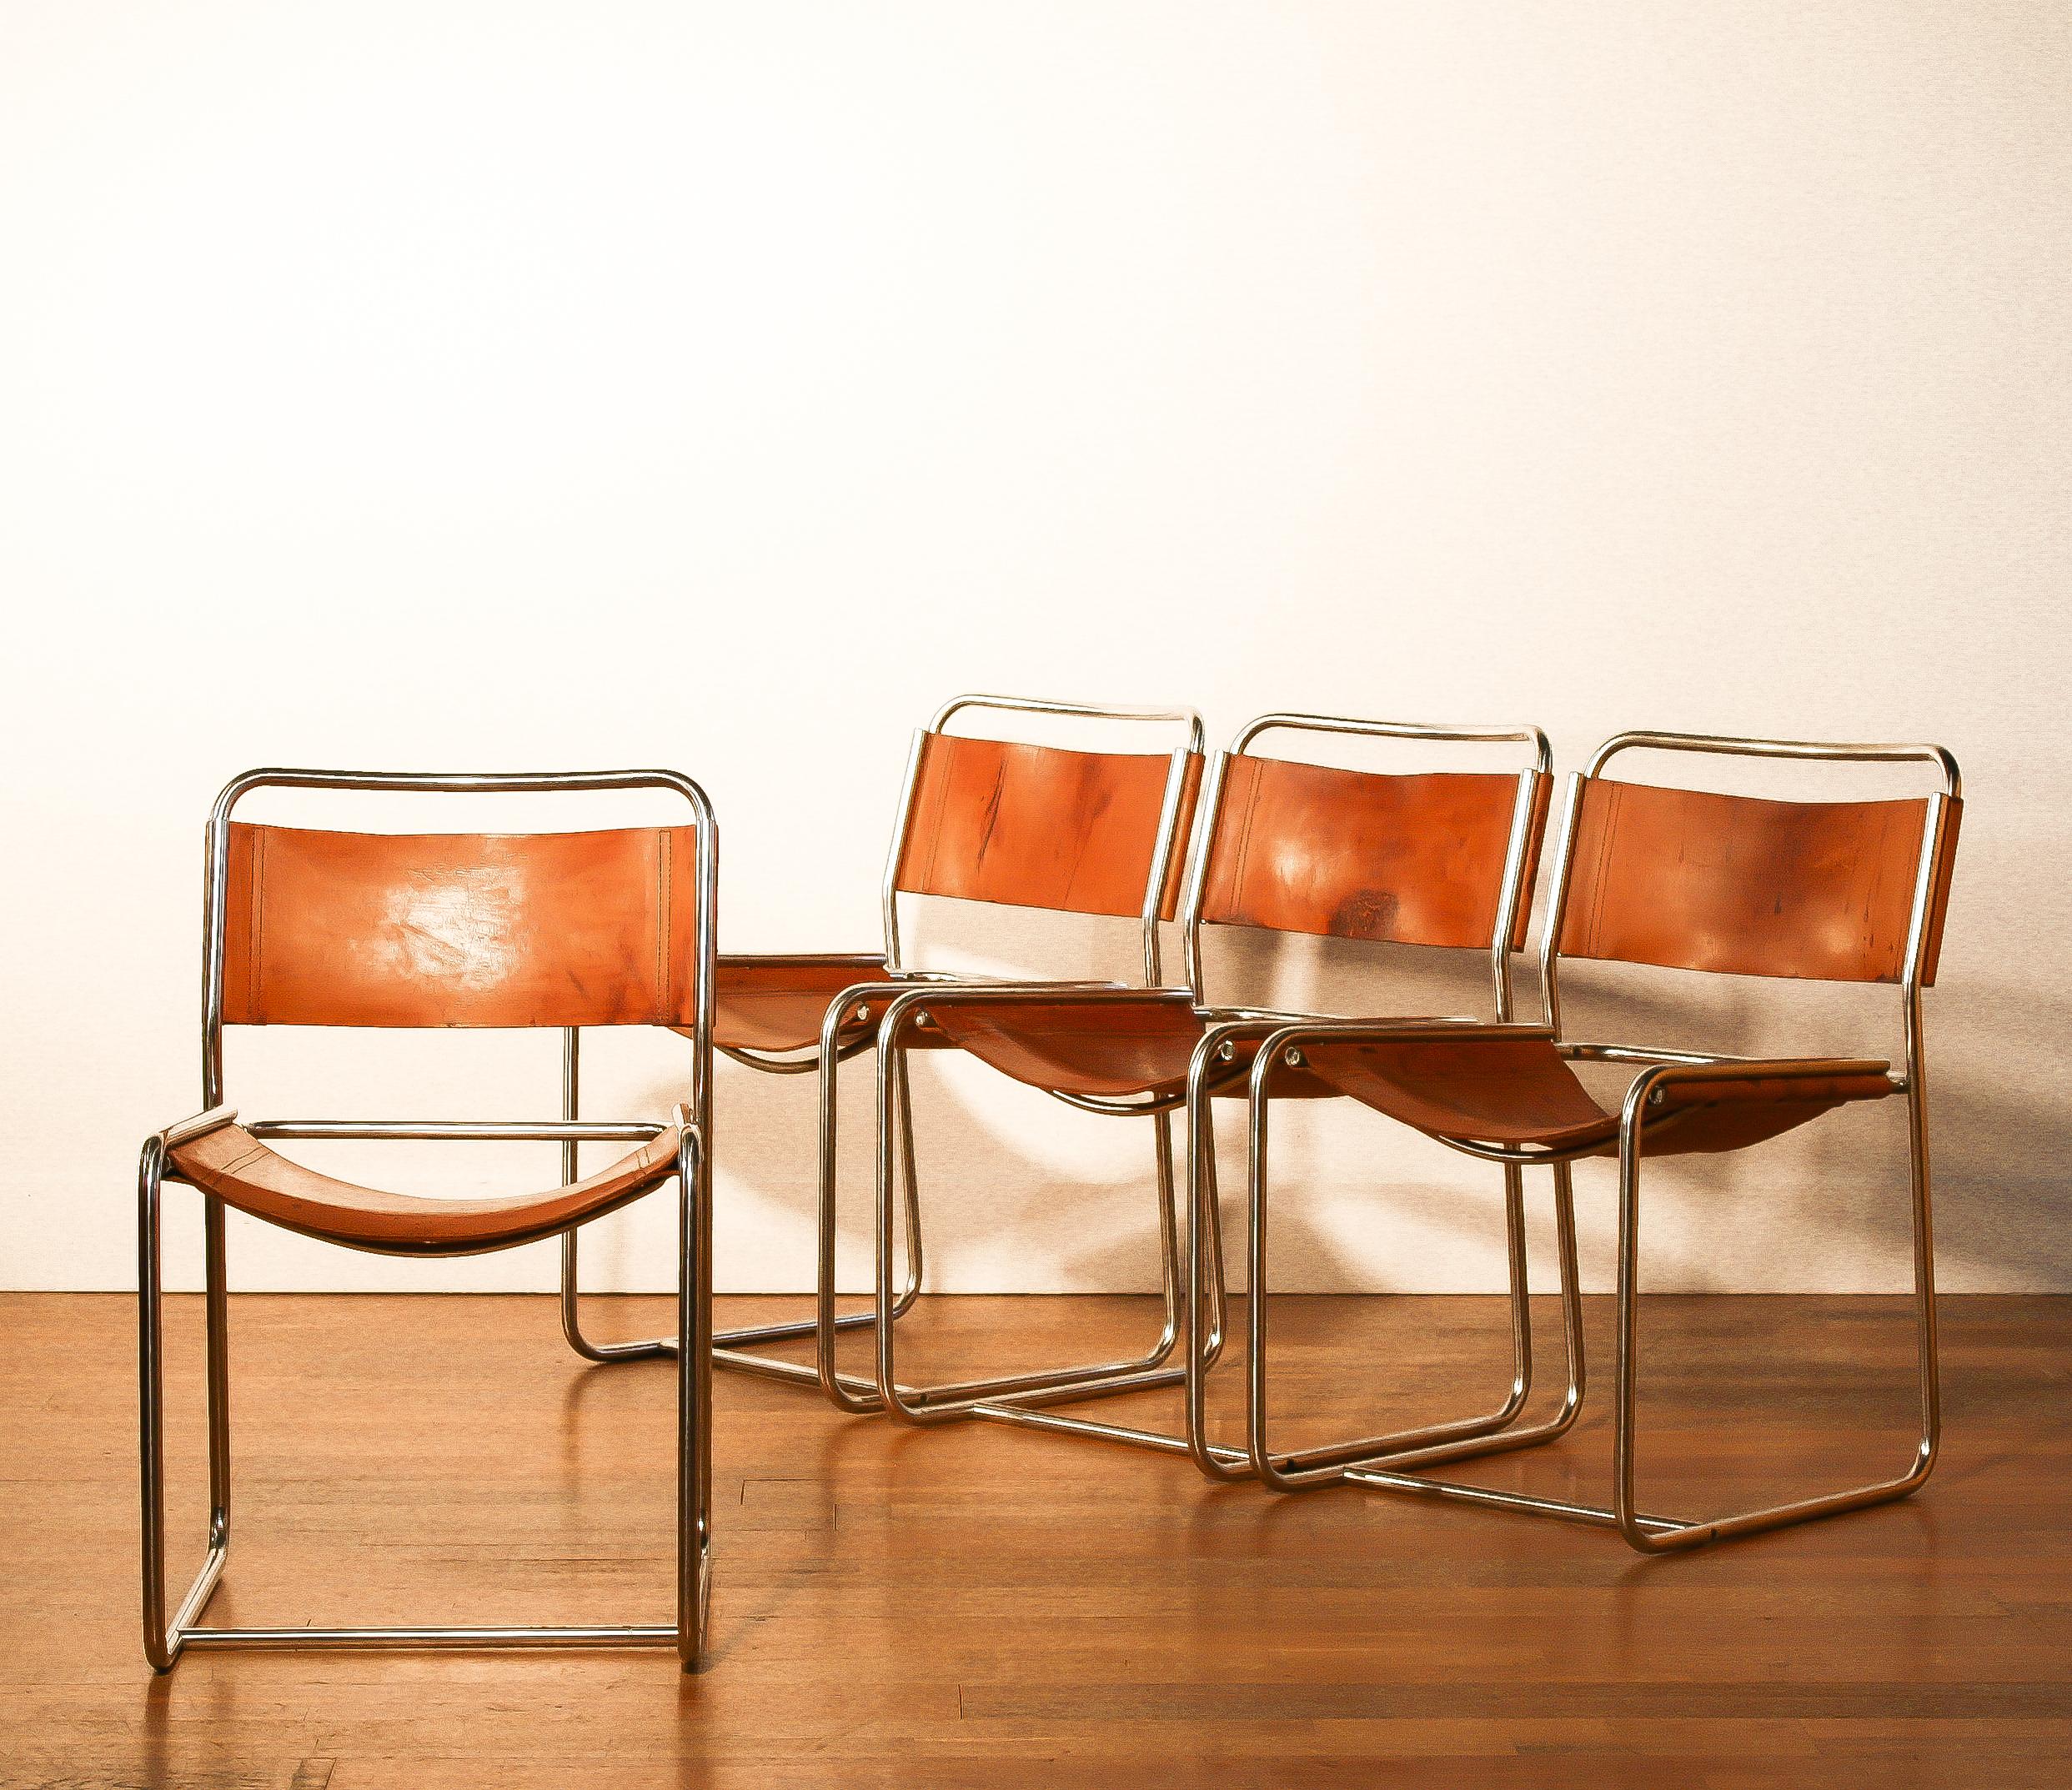 A nice set of four dining chairs designed by Paul Ibens & Clair Bataille.
The seat and the backrest are made of sturdy cognac leather. 
The frame consists of a steel tube that is shaped like a cube. 
The chairs are in a very nice used